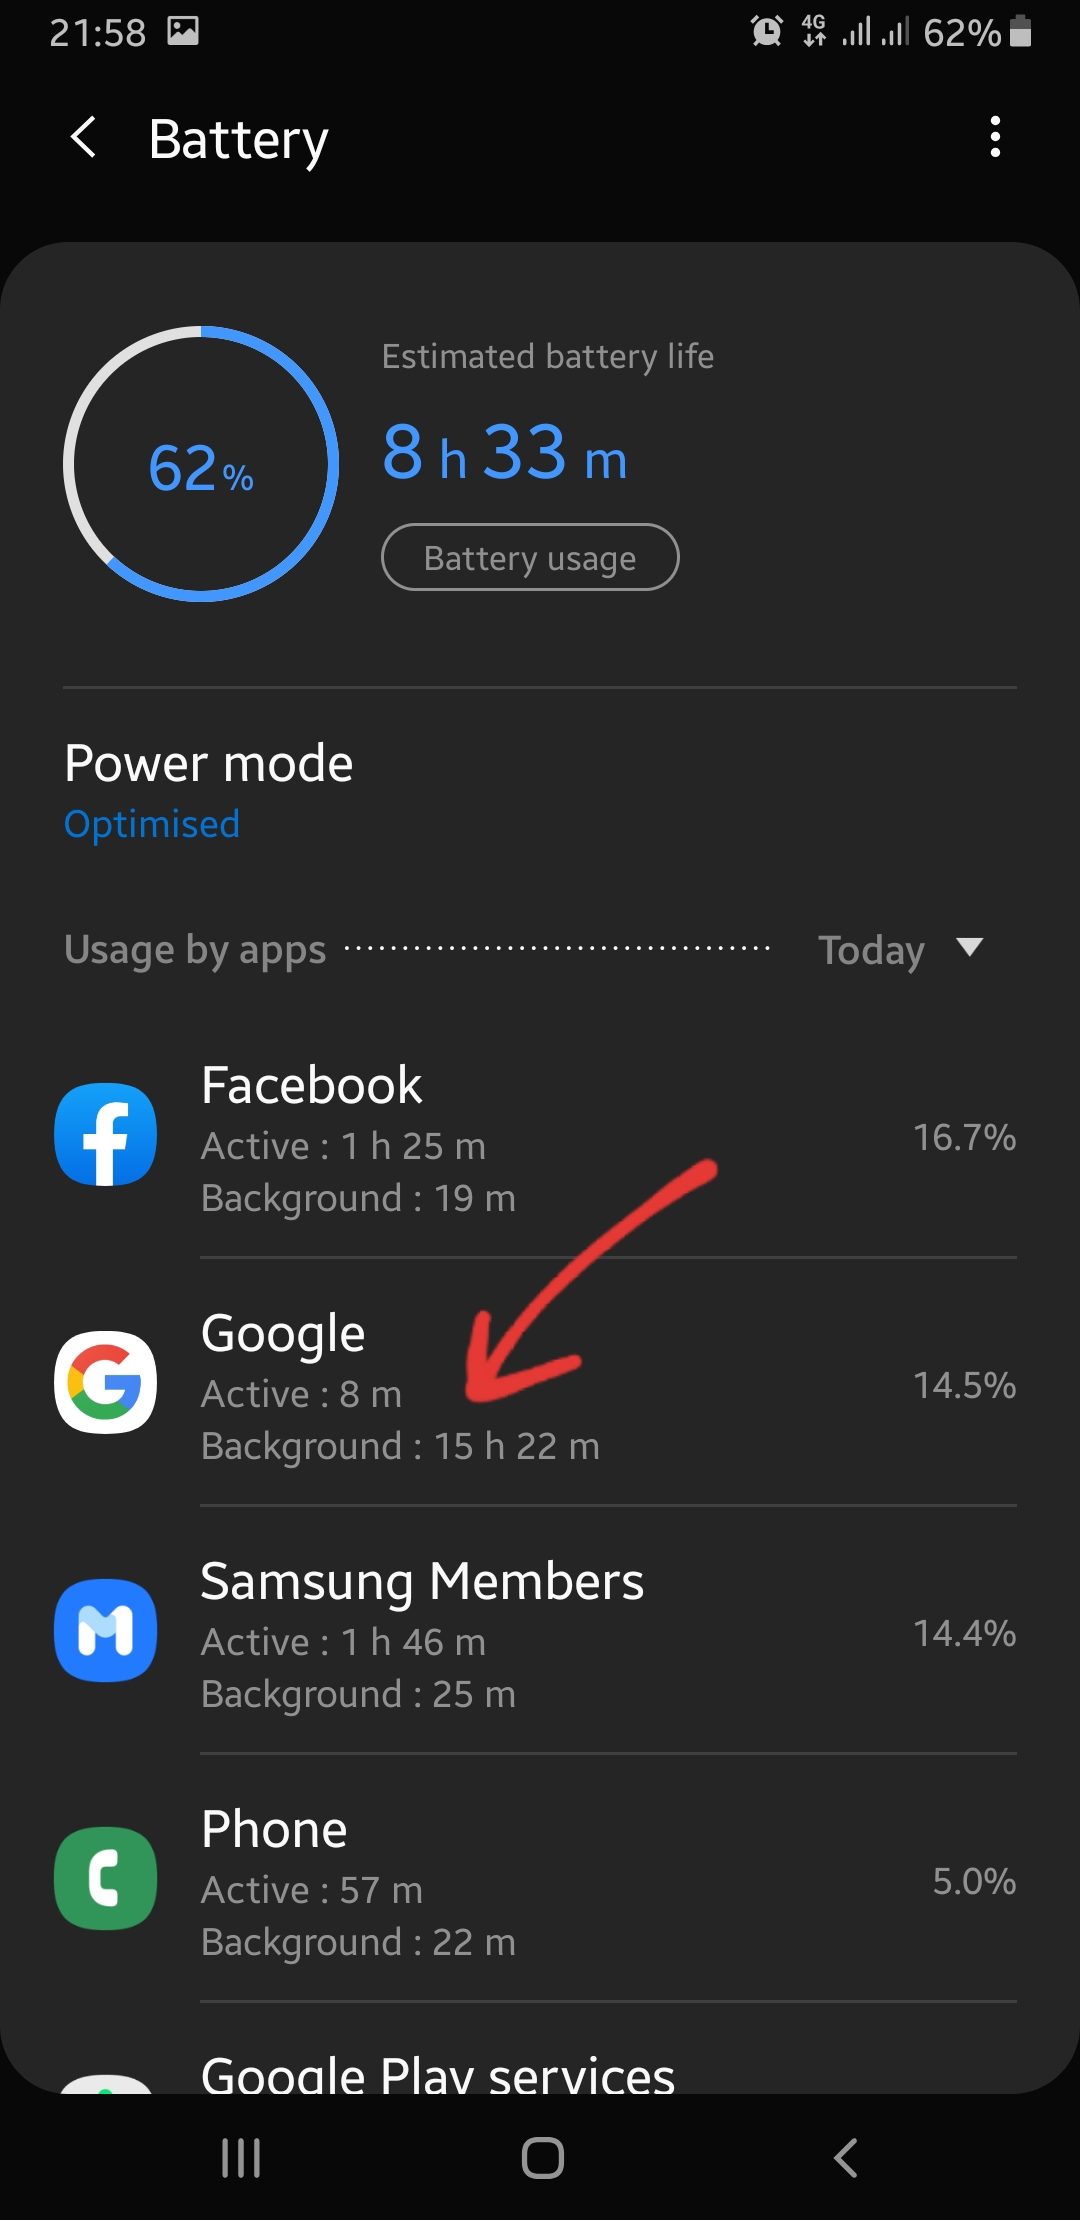 how to stop background apps - Samsung Members